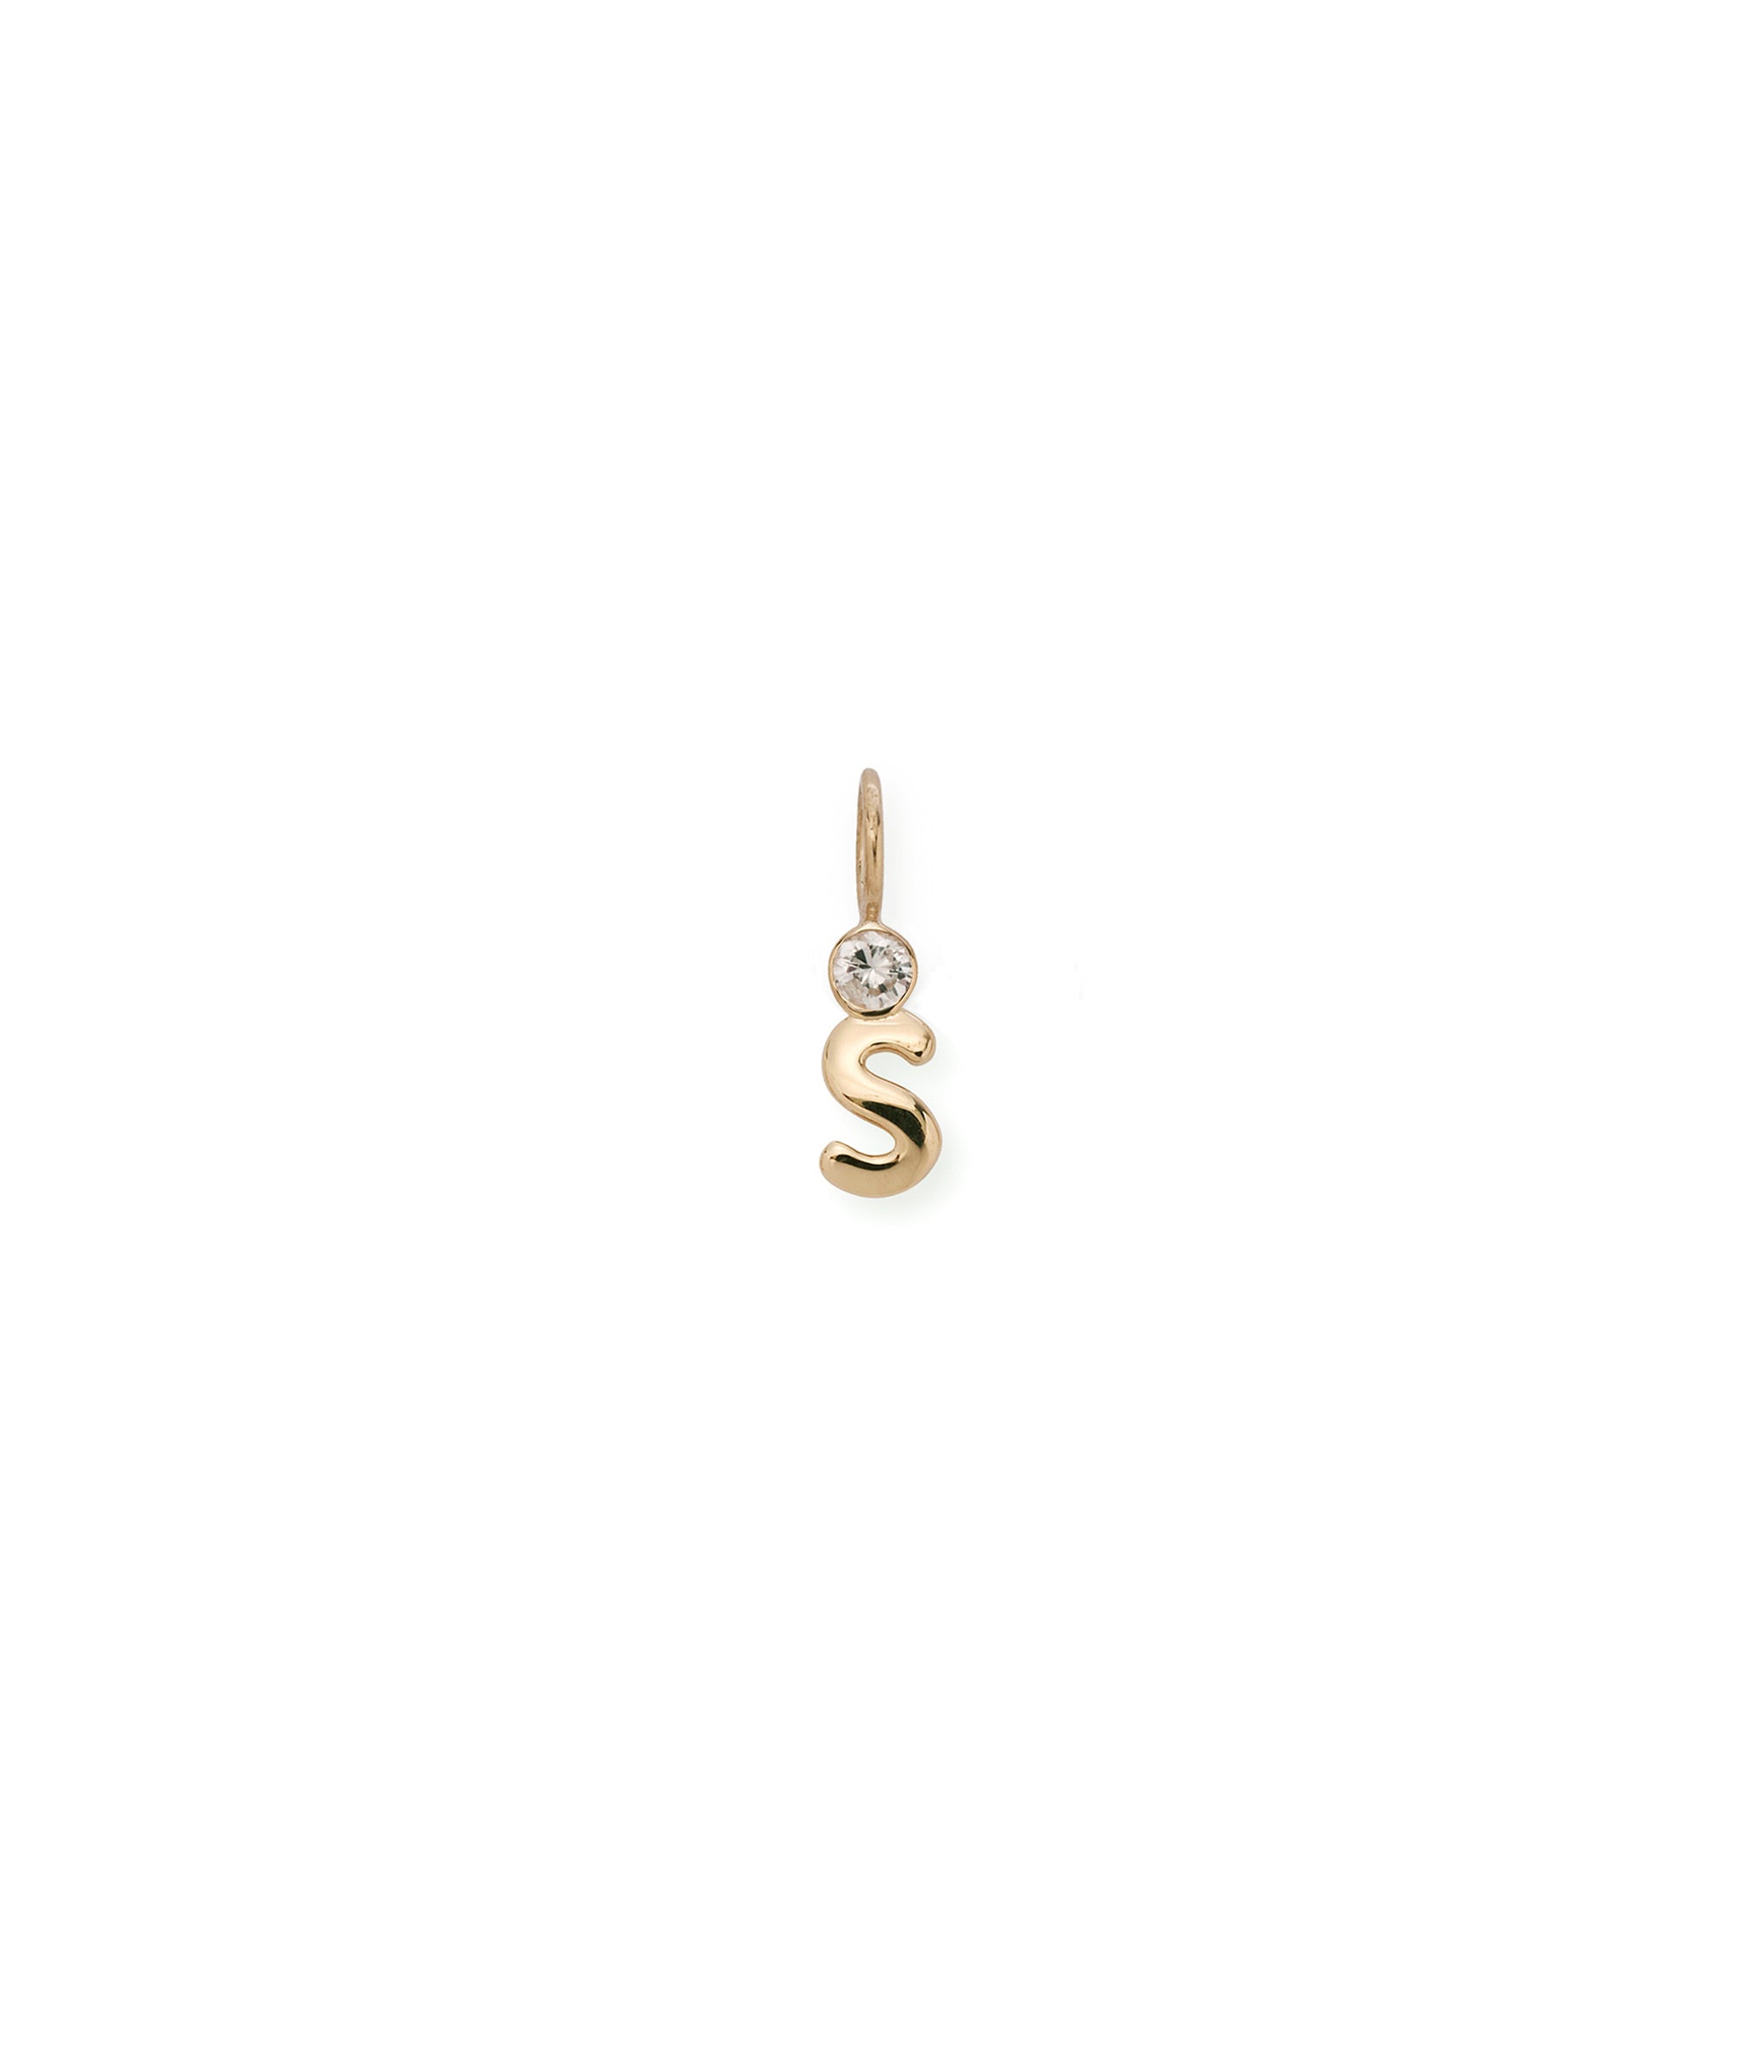 Alphabet Soup "S" Charm. Puffy mini 14k gold letter "S" charm with round diamond accent.